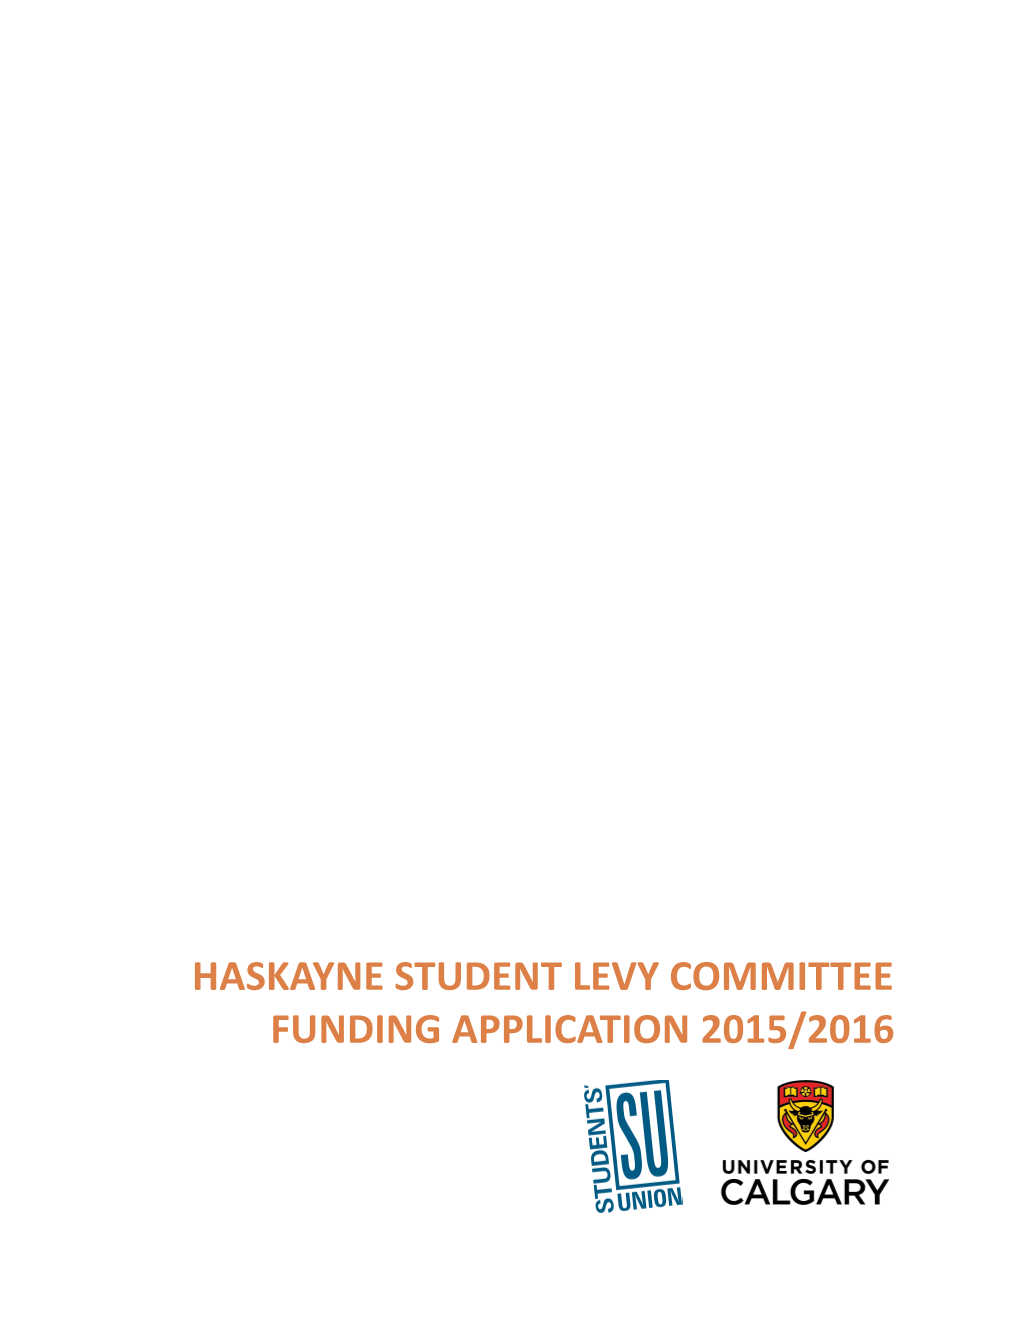 Haskayne Student Levy Committee Funding Application